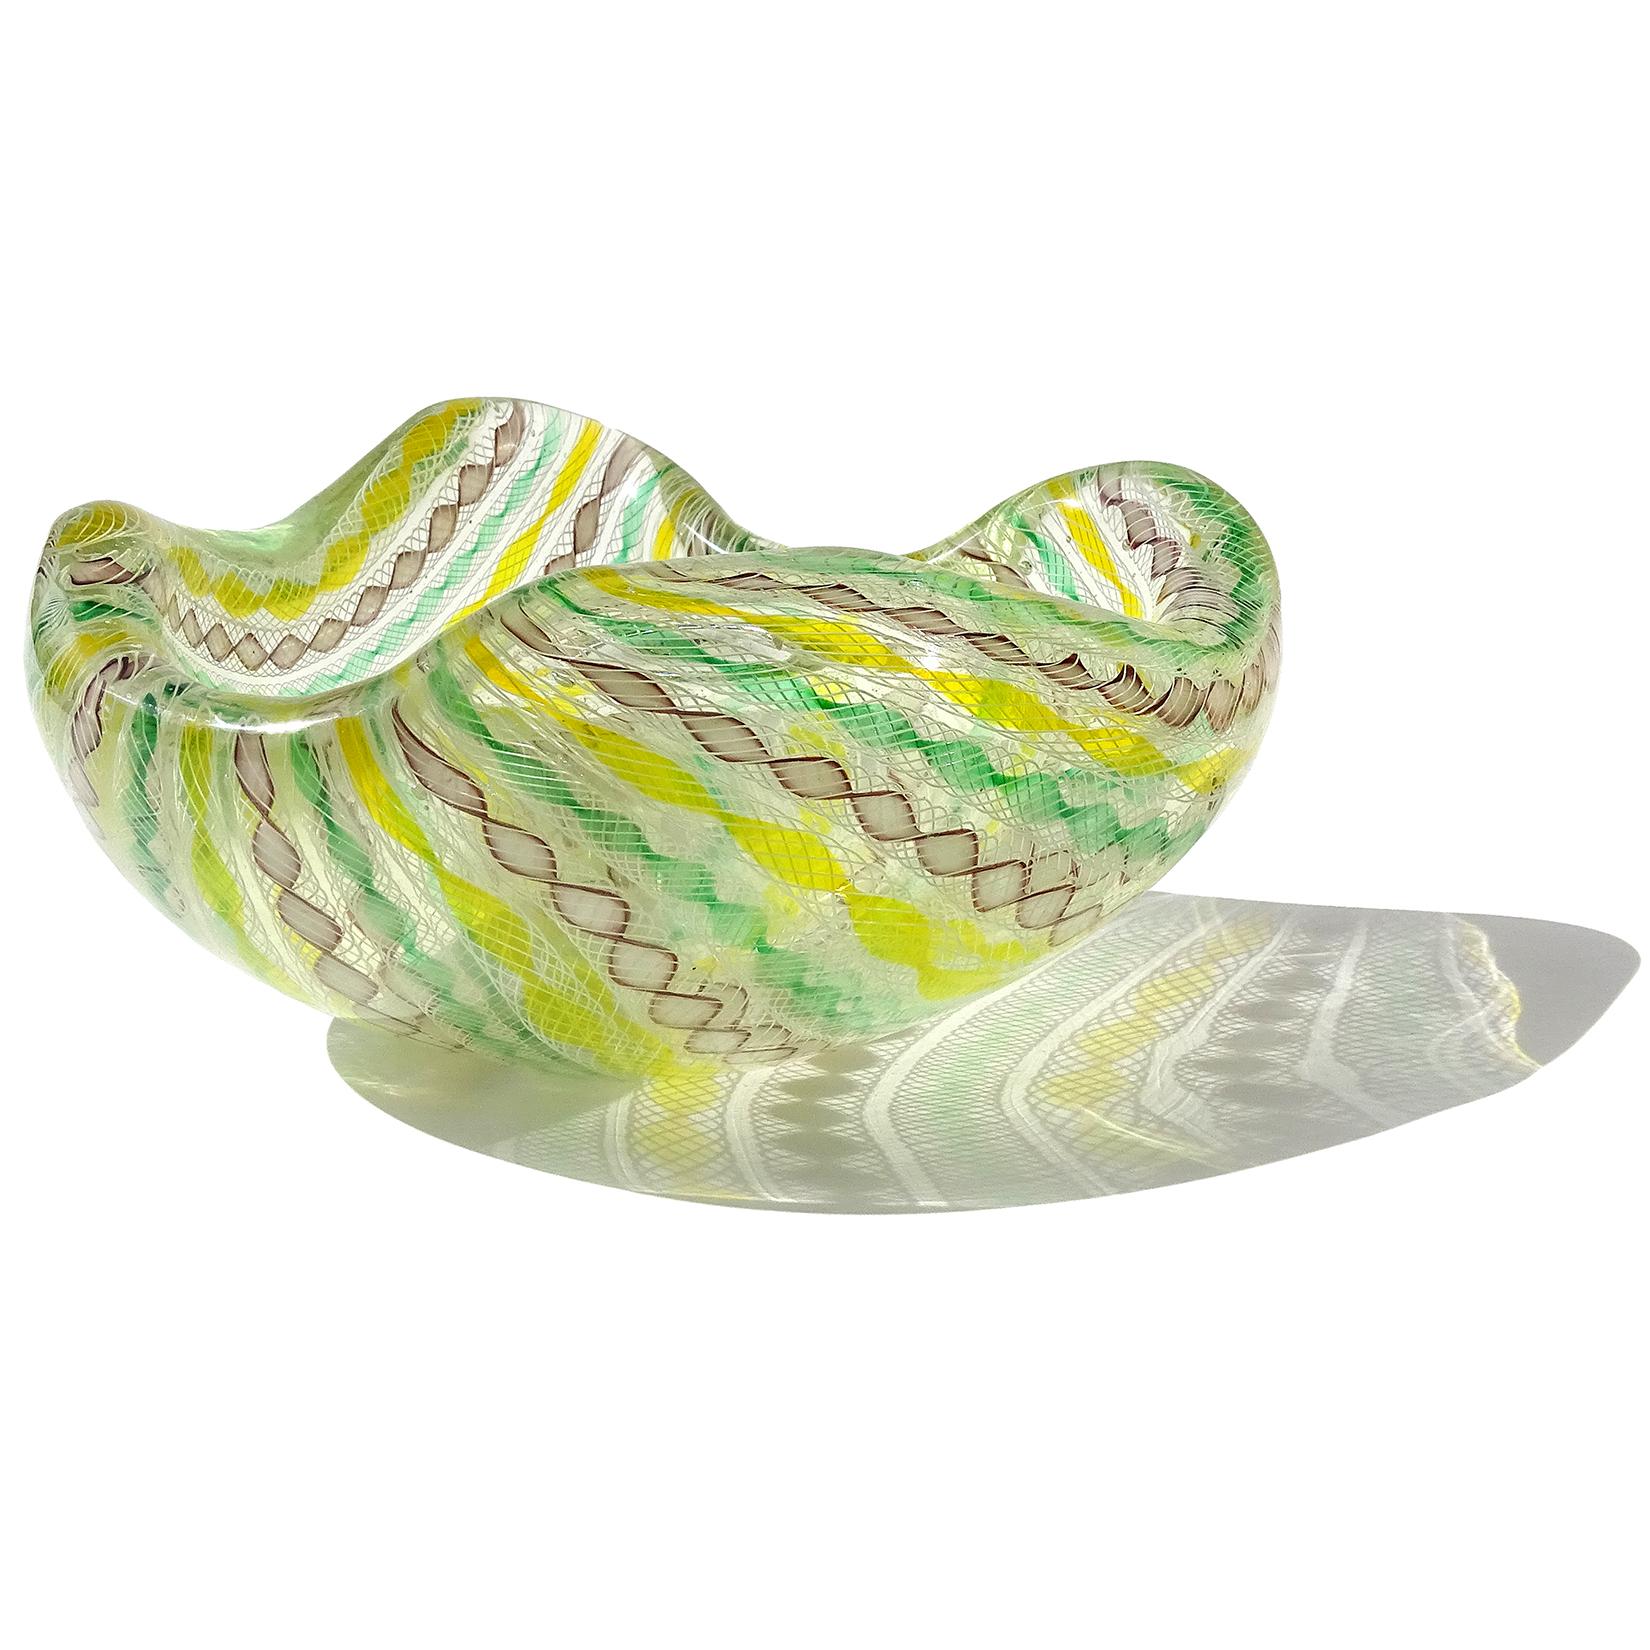 Beautiful large vintage Murano hand blown Zanfirico twisted ribbons Italian art glass bowl. Documented to designer Archimede Seguso, circa 1955. Published, as seen on the last photo. It has yellow, green, purple and white ribbon colors, with white